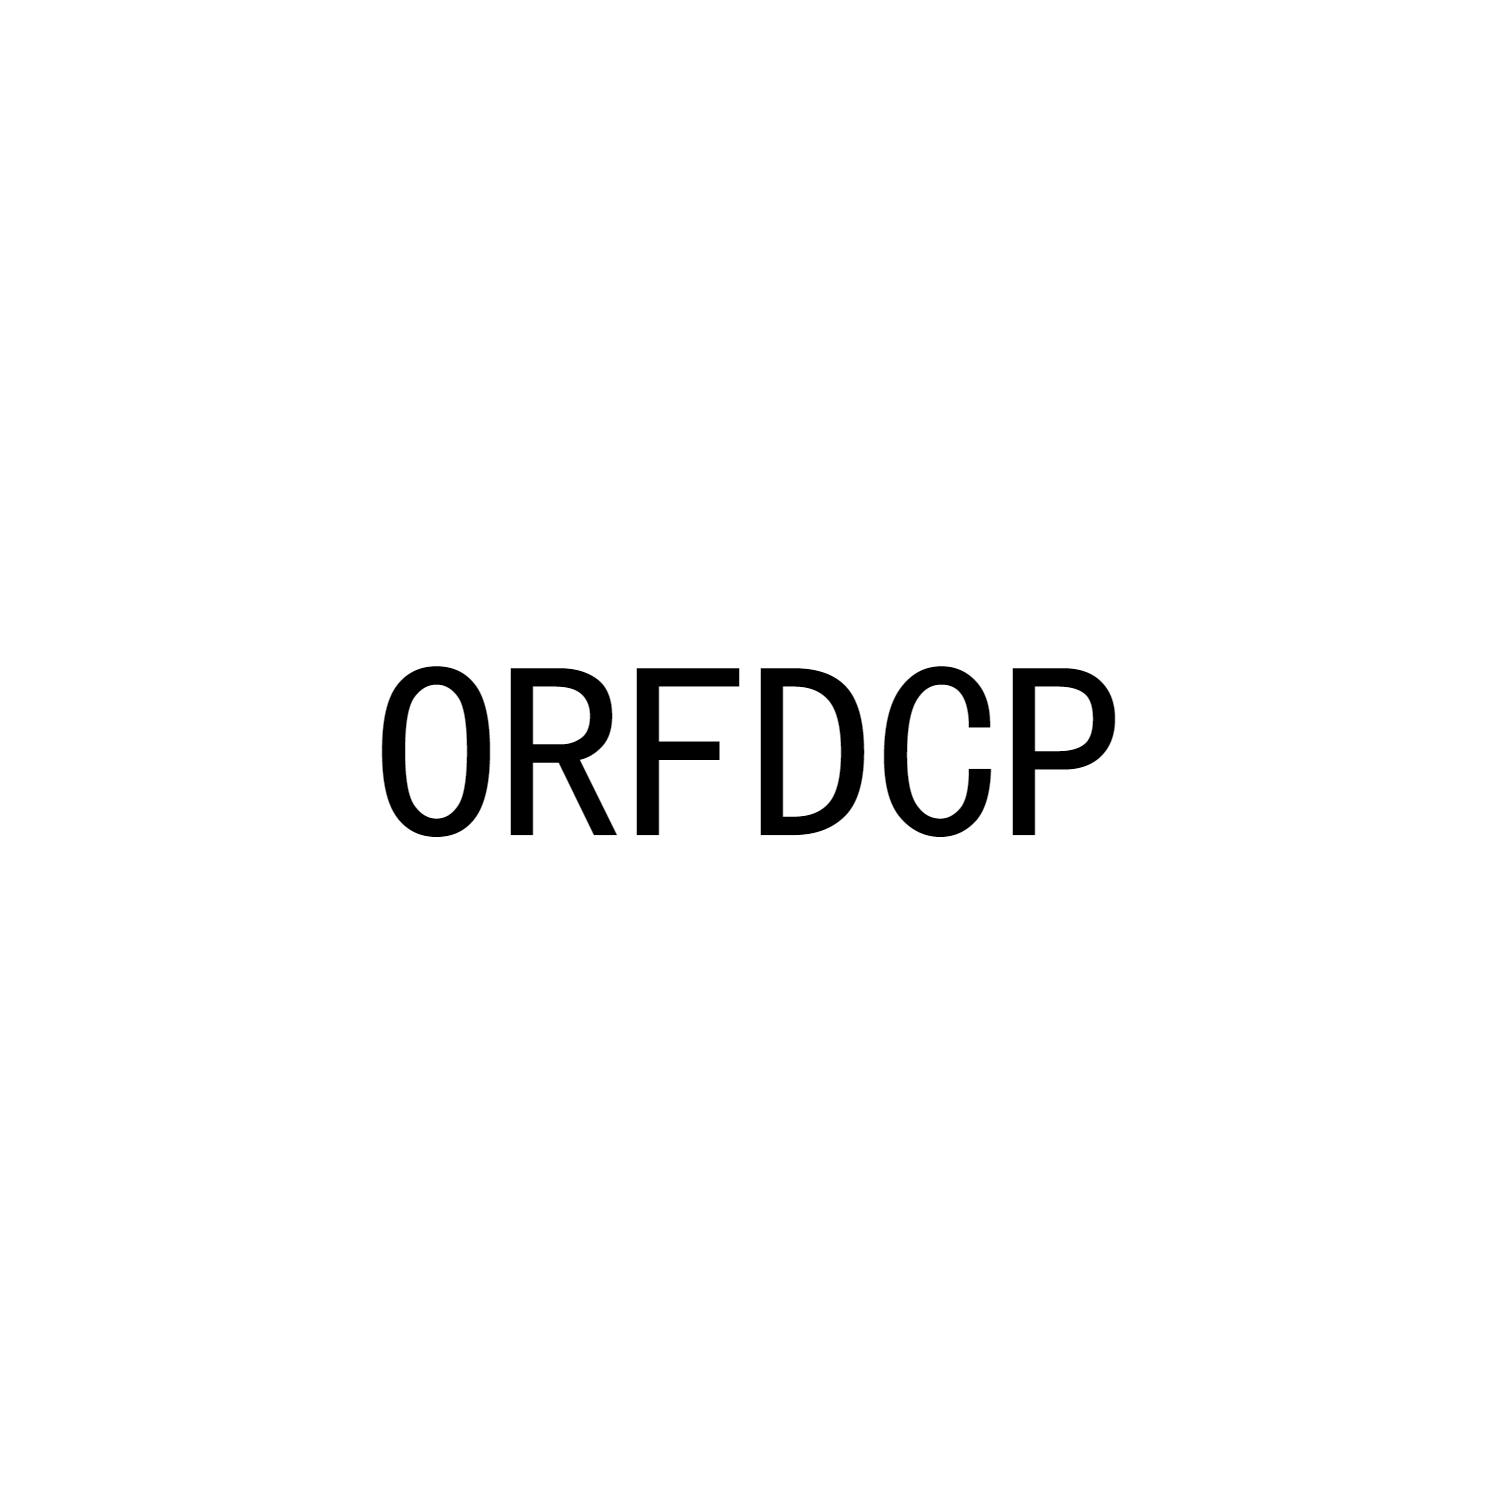 ORFDCP